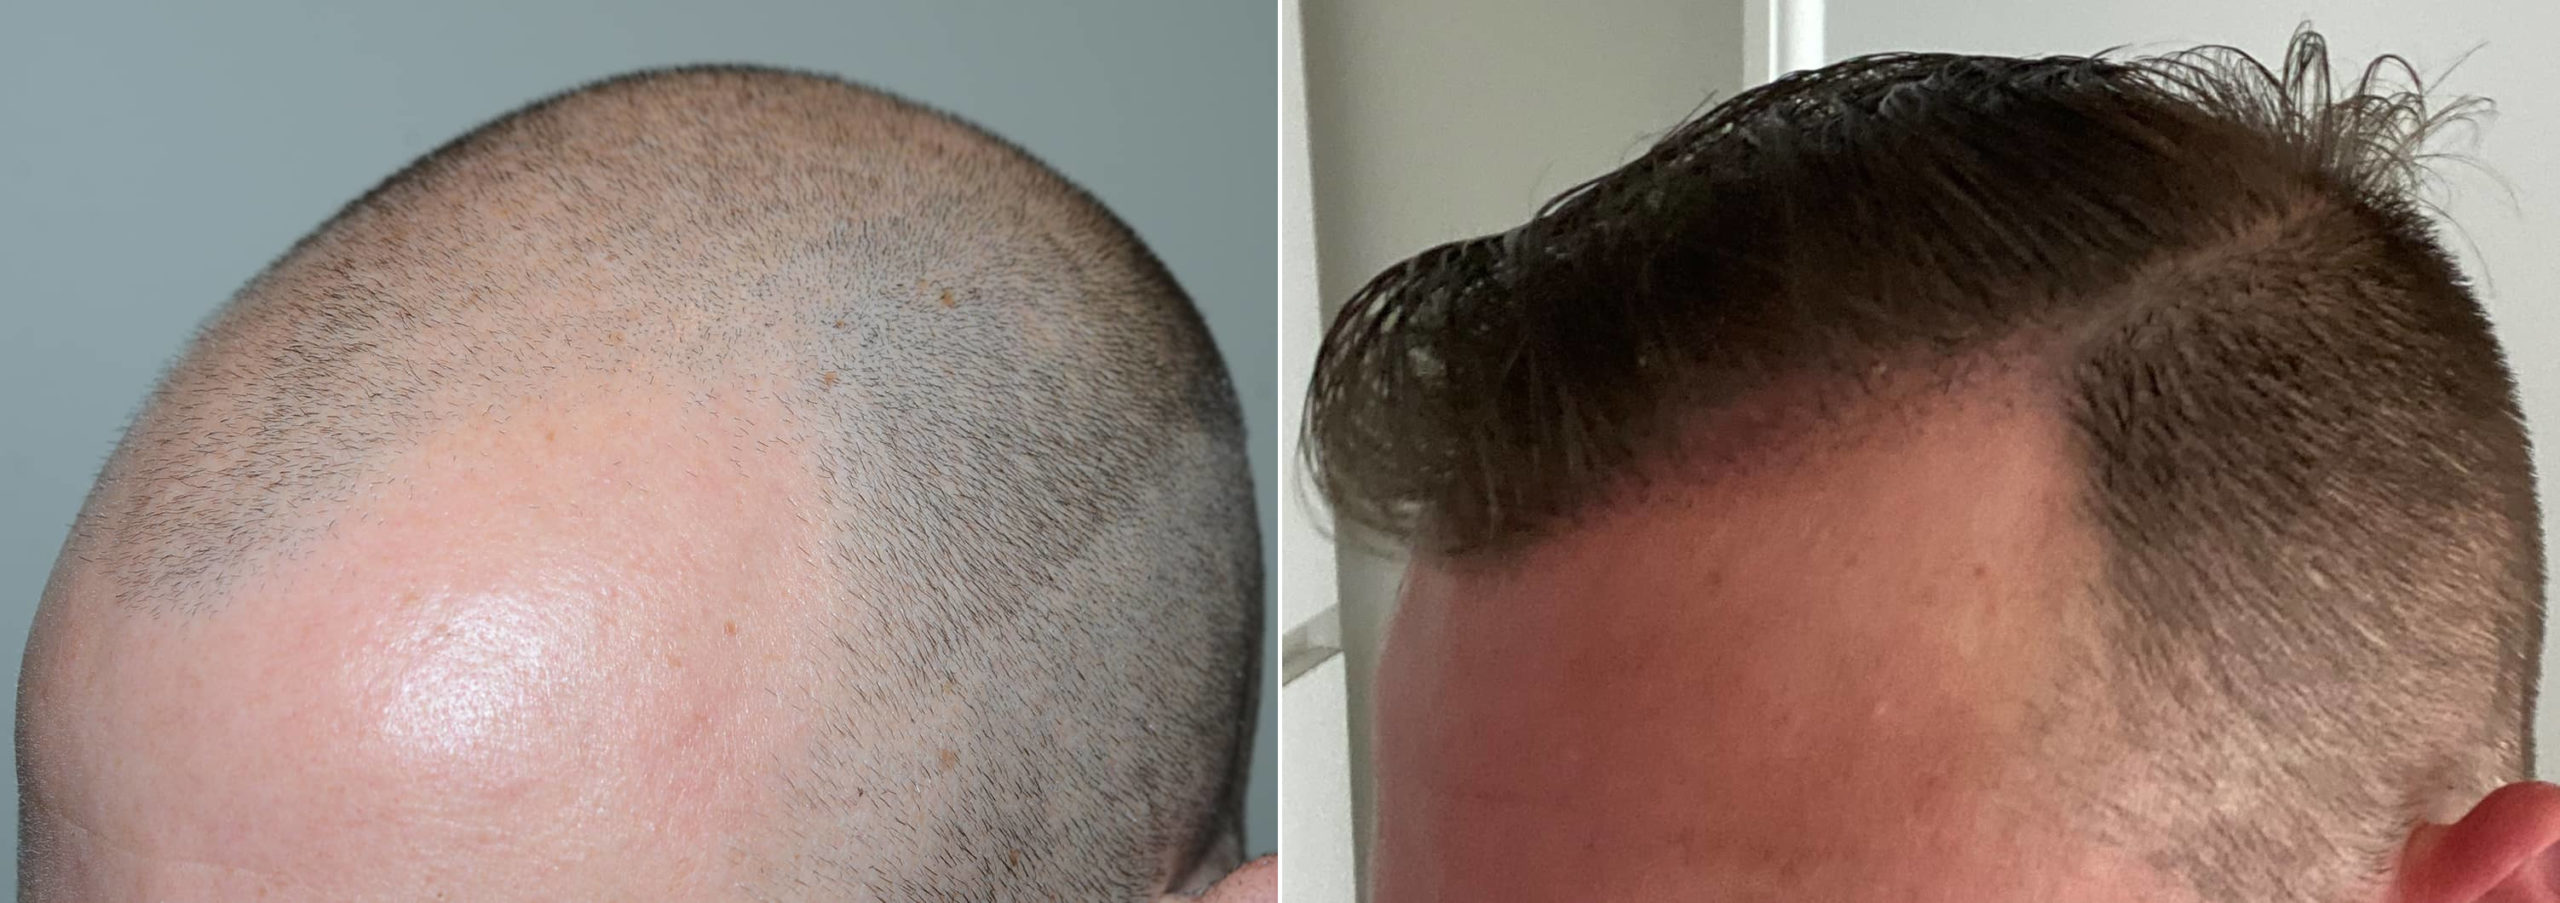 Before and After Gallery - City Clinics London - Hair Transplant London